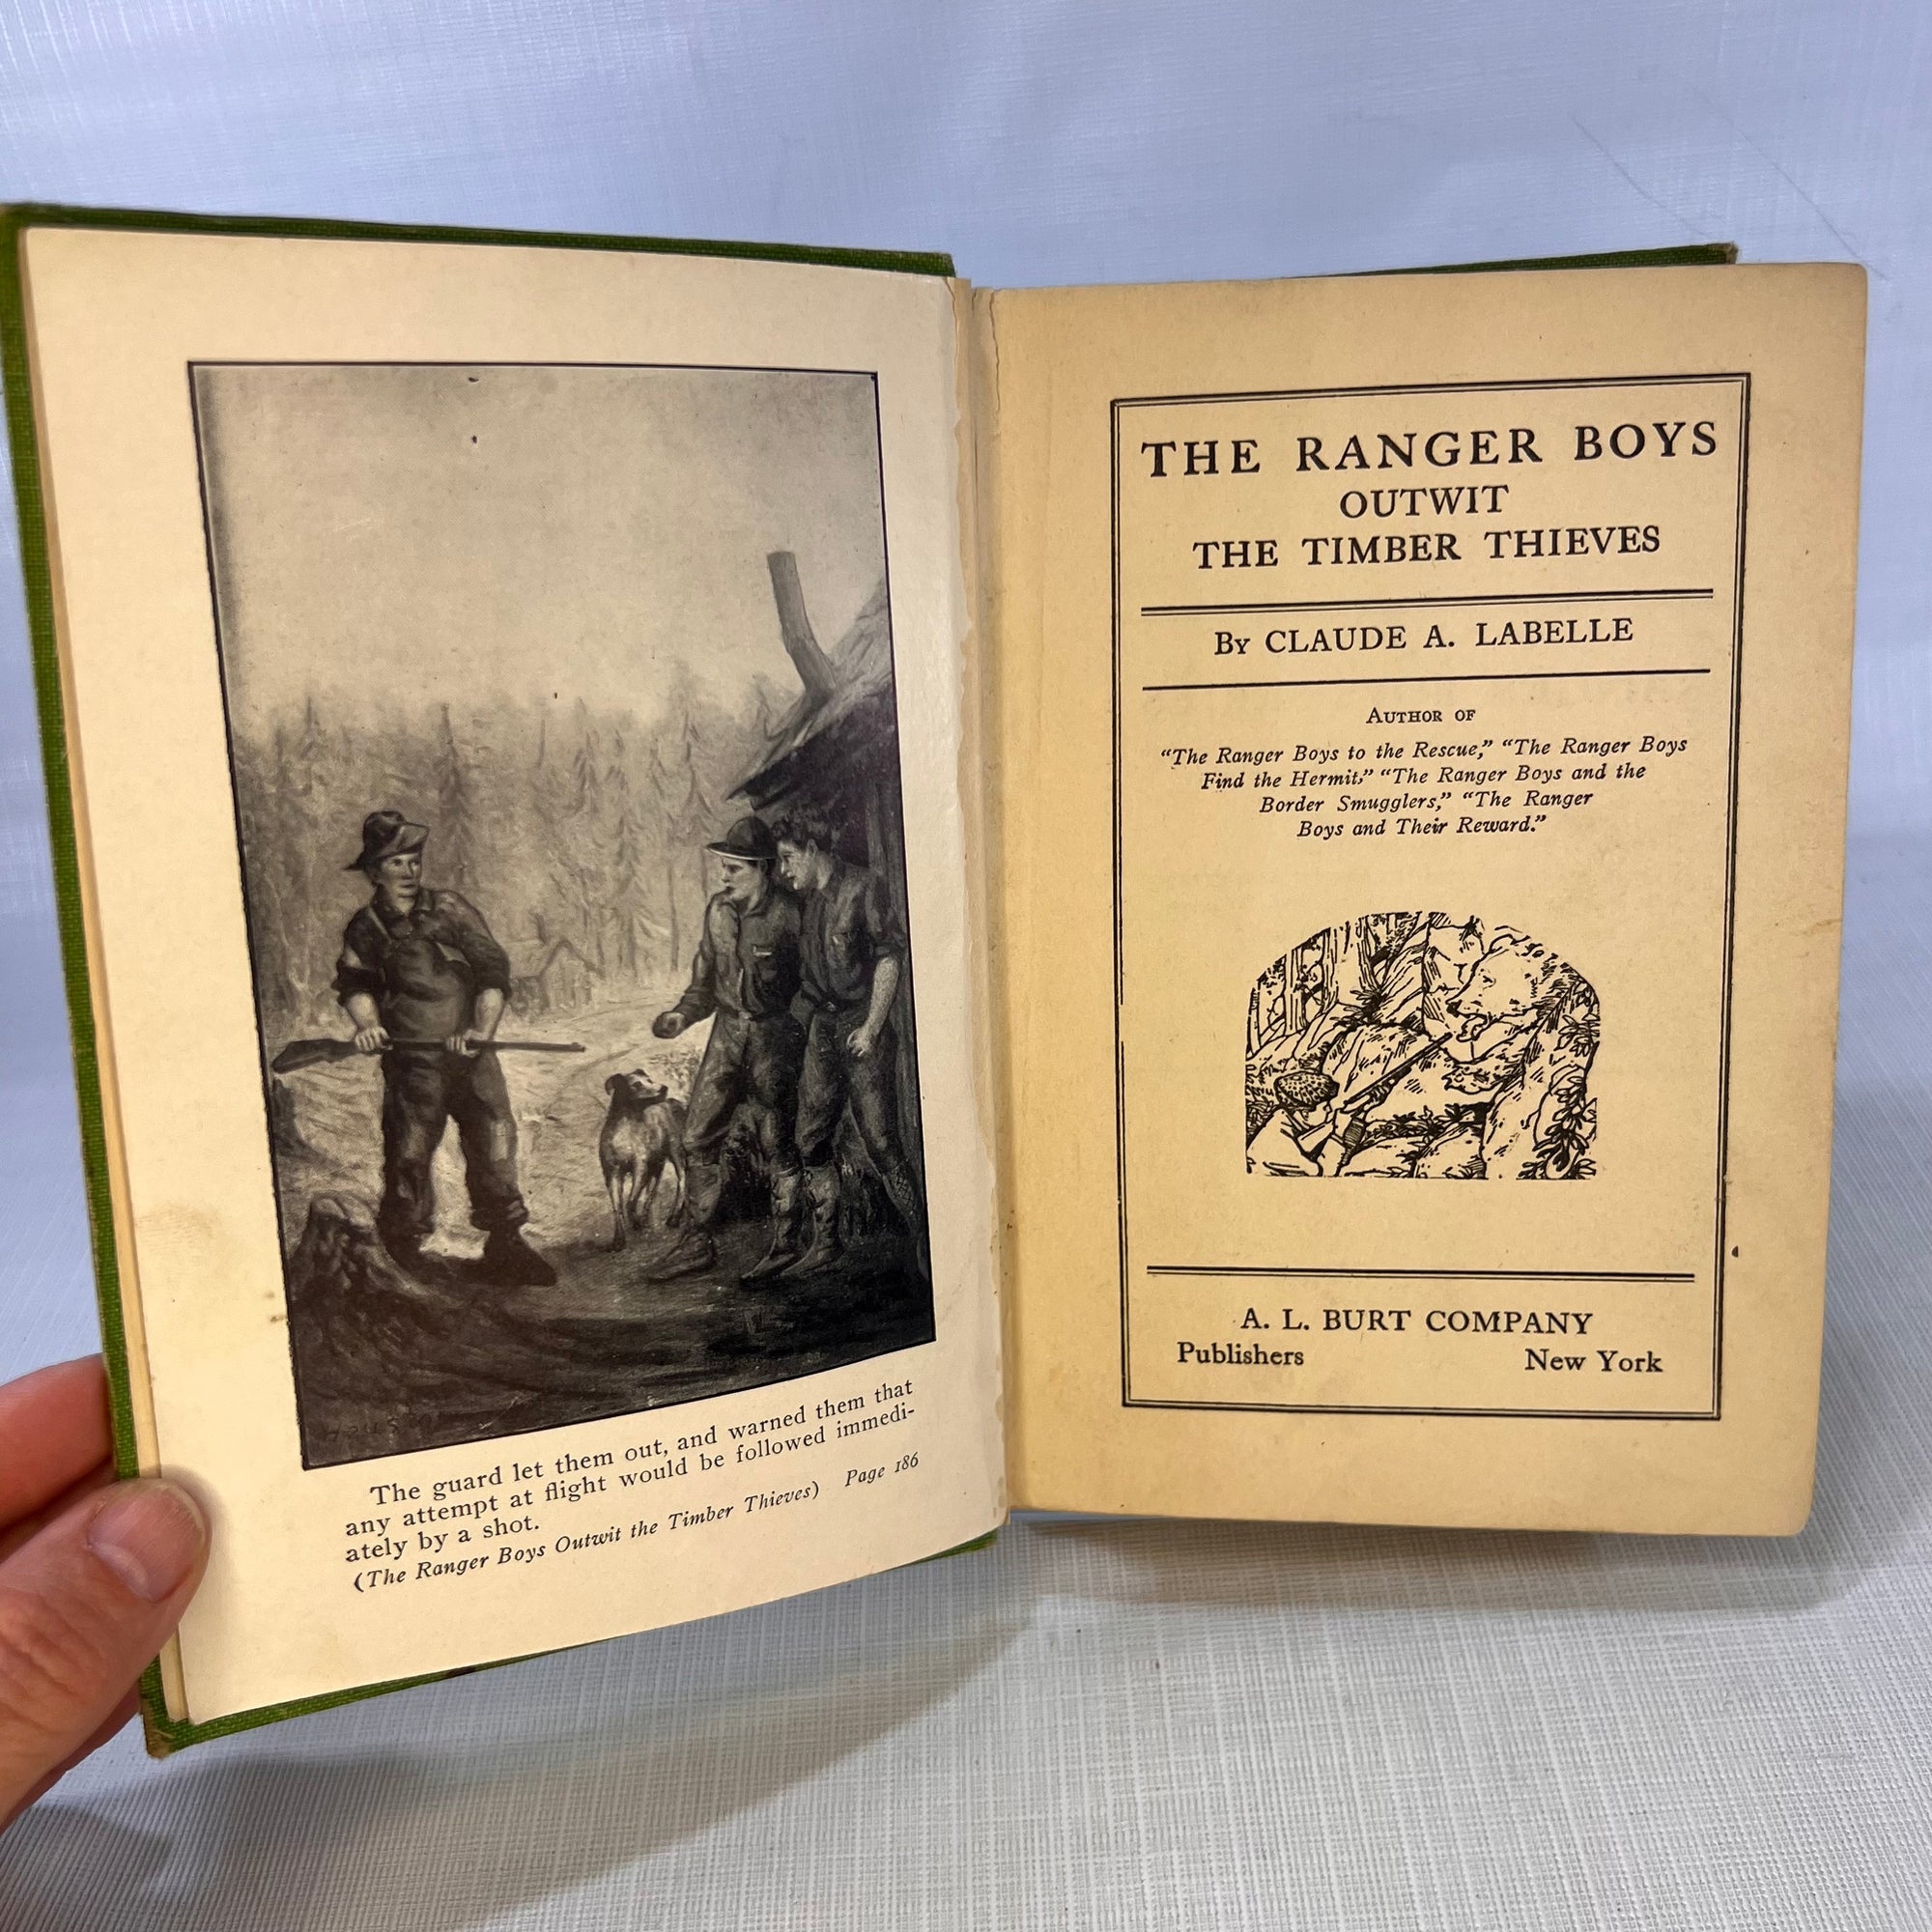 The Ranger Boys Outwit the Timber Thieves by Claude A. Labelle 1922 A.L. Burt Company